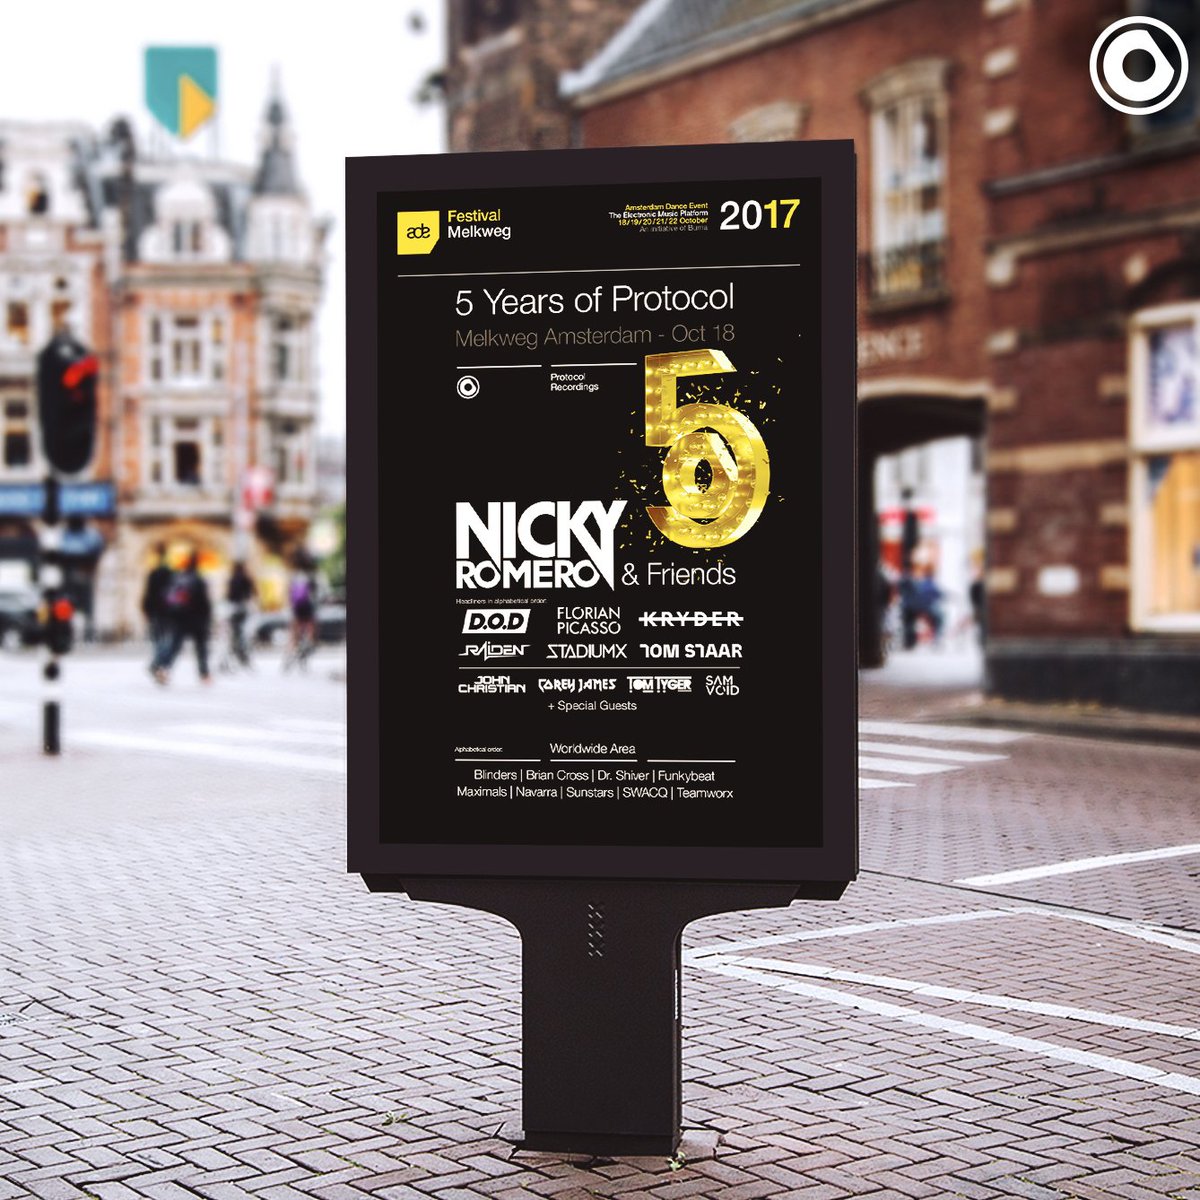 Proud to welcome these amazing artists to celebrate '5 Years of @ProtocolRec' during ADE! 🔥 prot.cl/ADE17-tickets https://t.co/rNZCtUjiLo